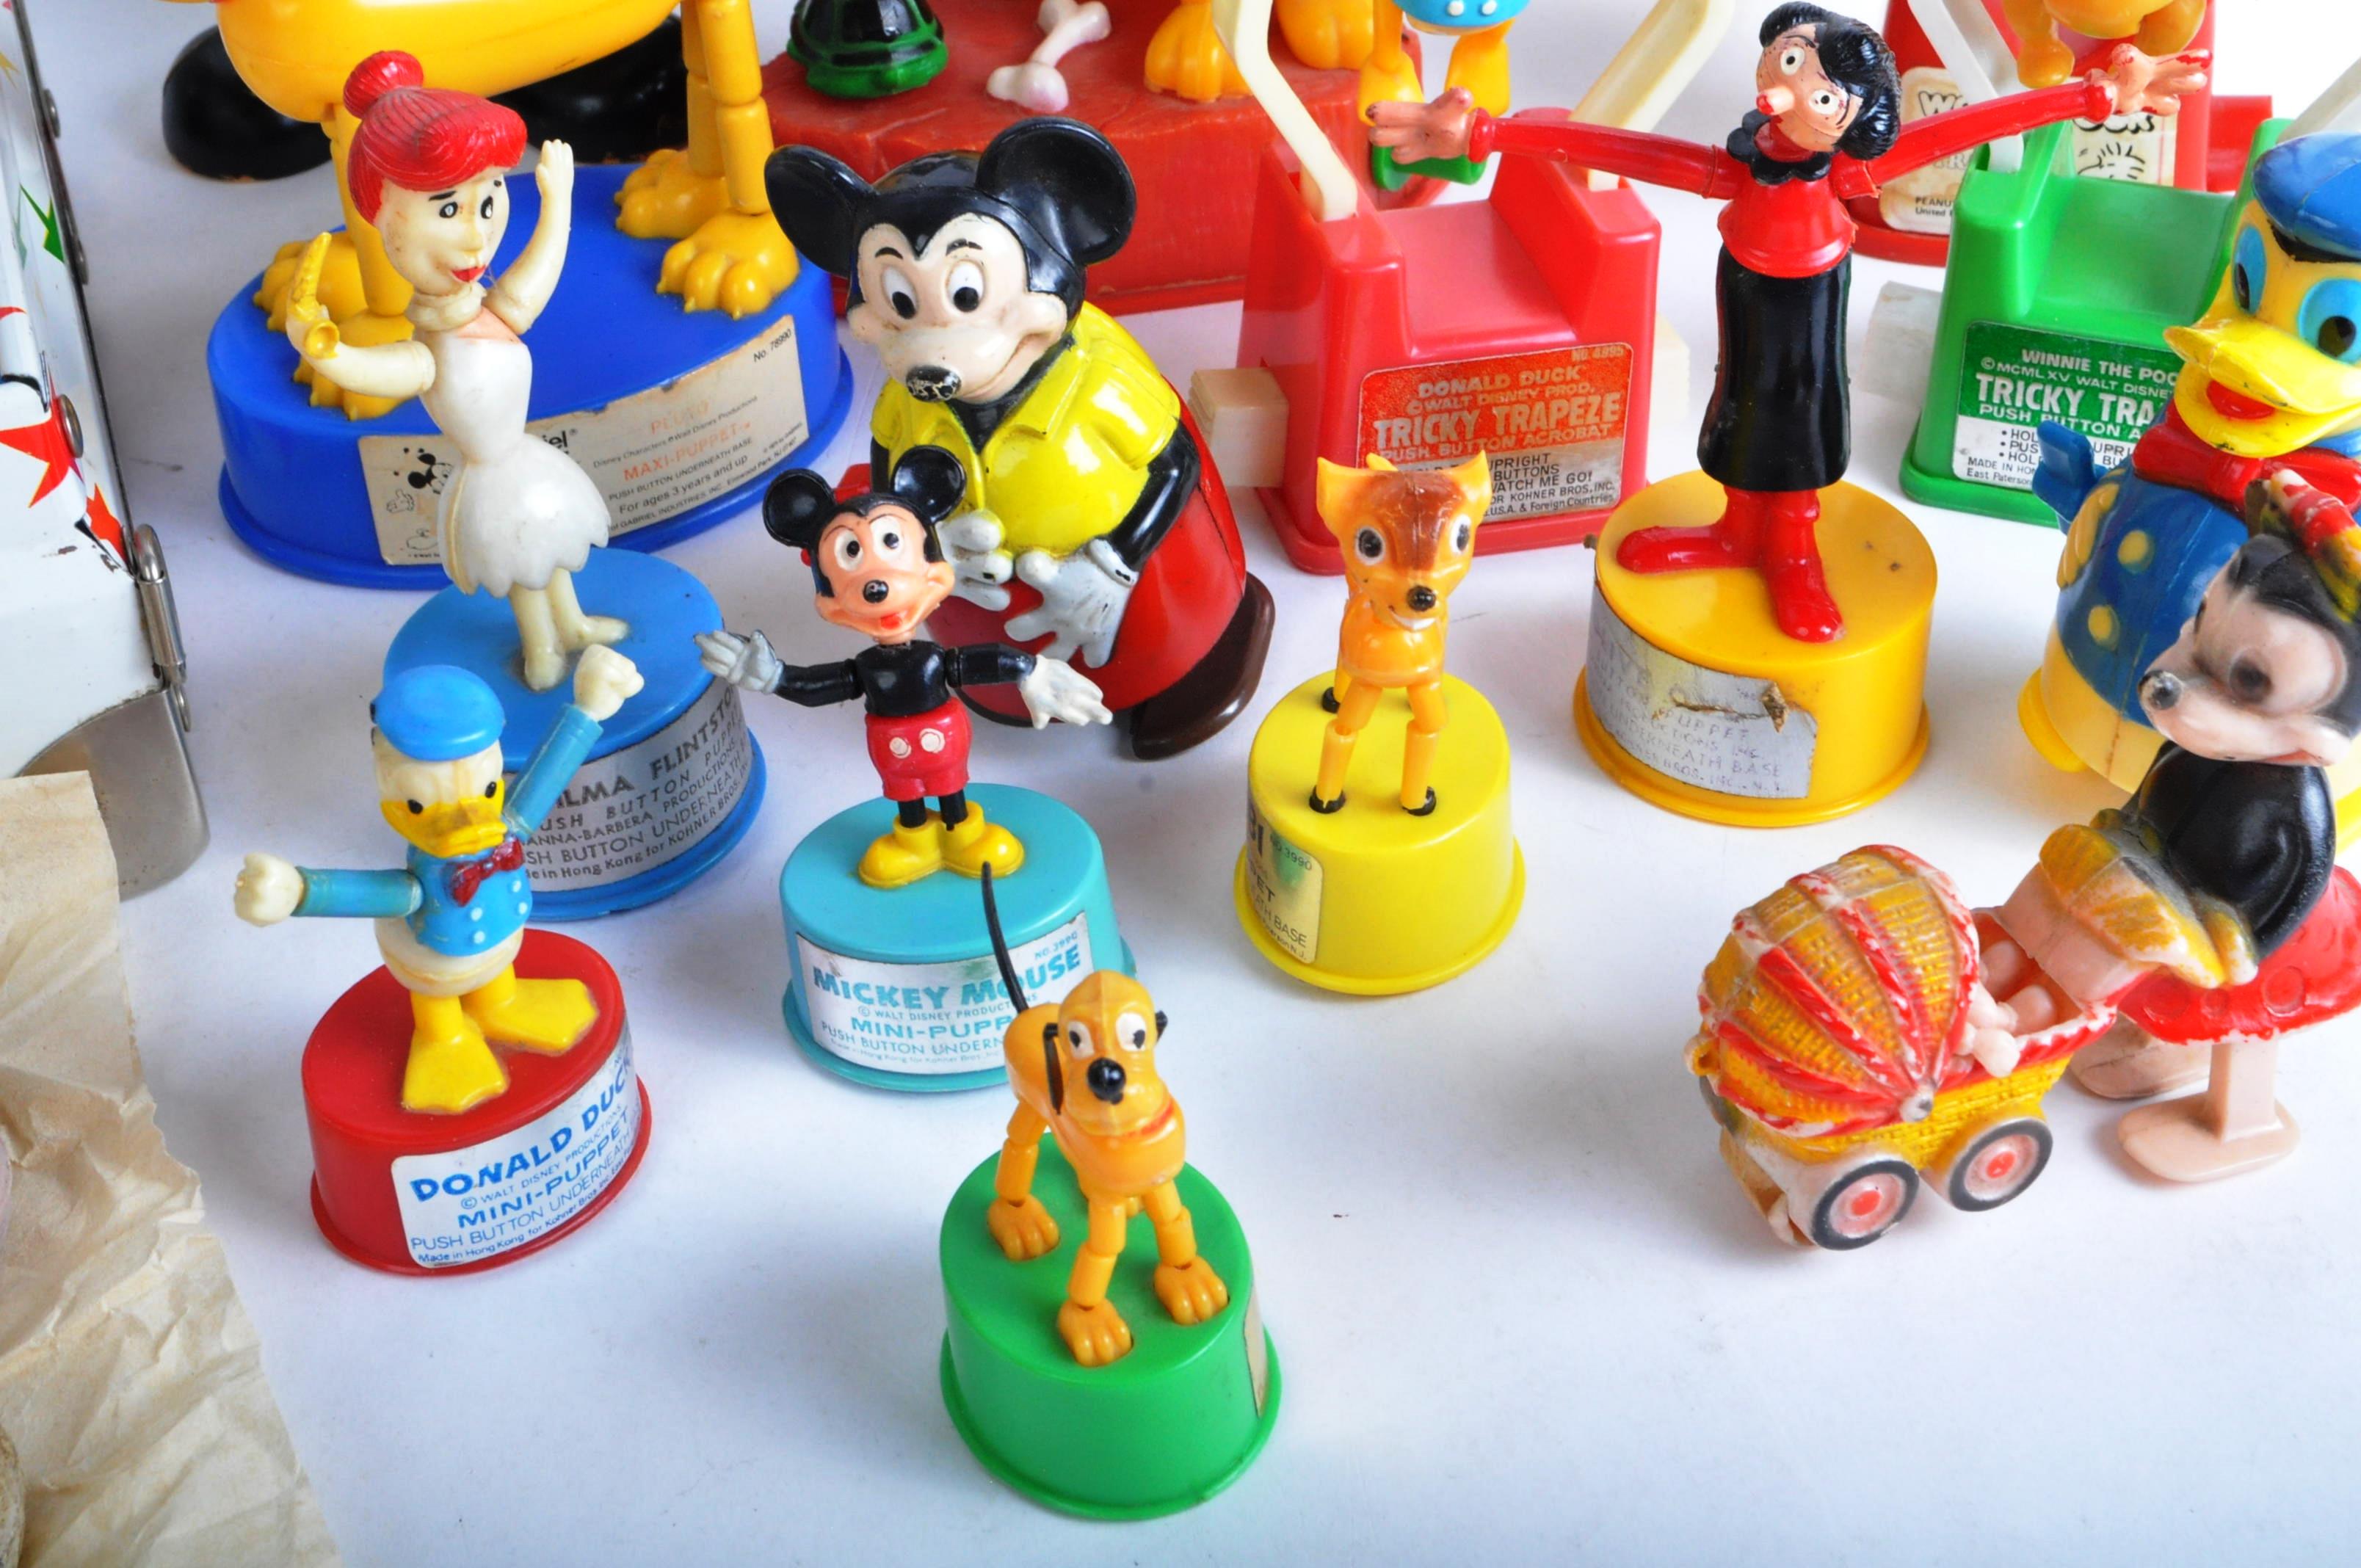 WALT DISNEY / HANNA BARBERA - COLLECTION OF VINTAGE 1950S & OTHER TOYS - Image 6 of 9